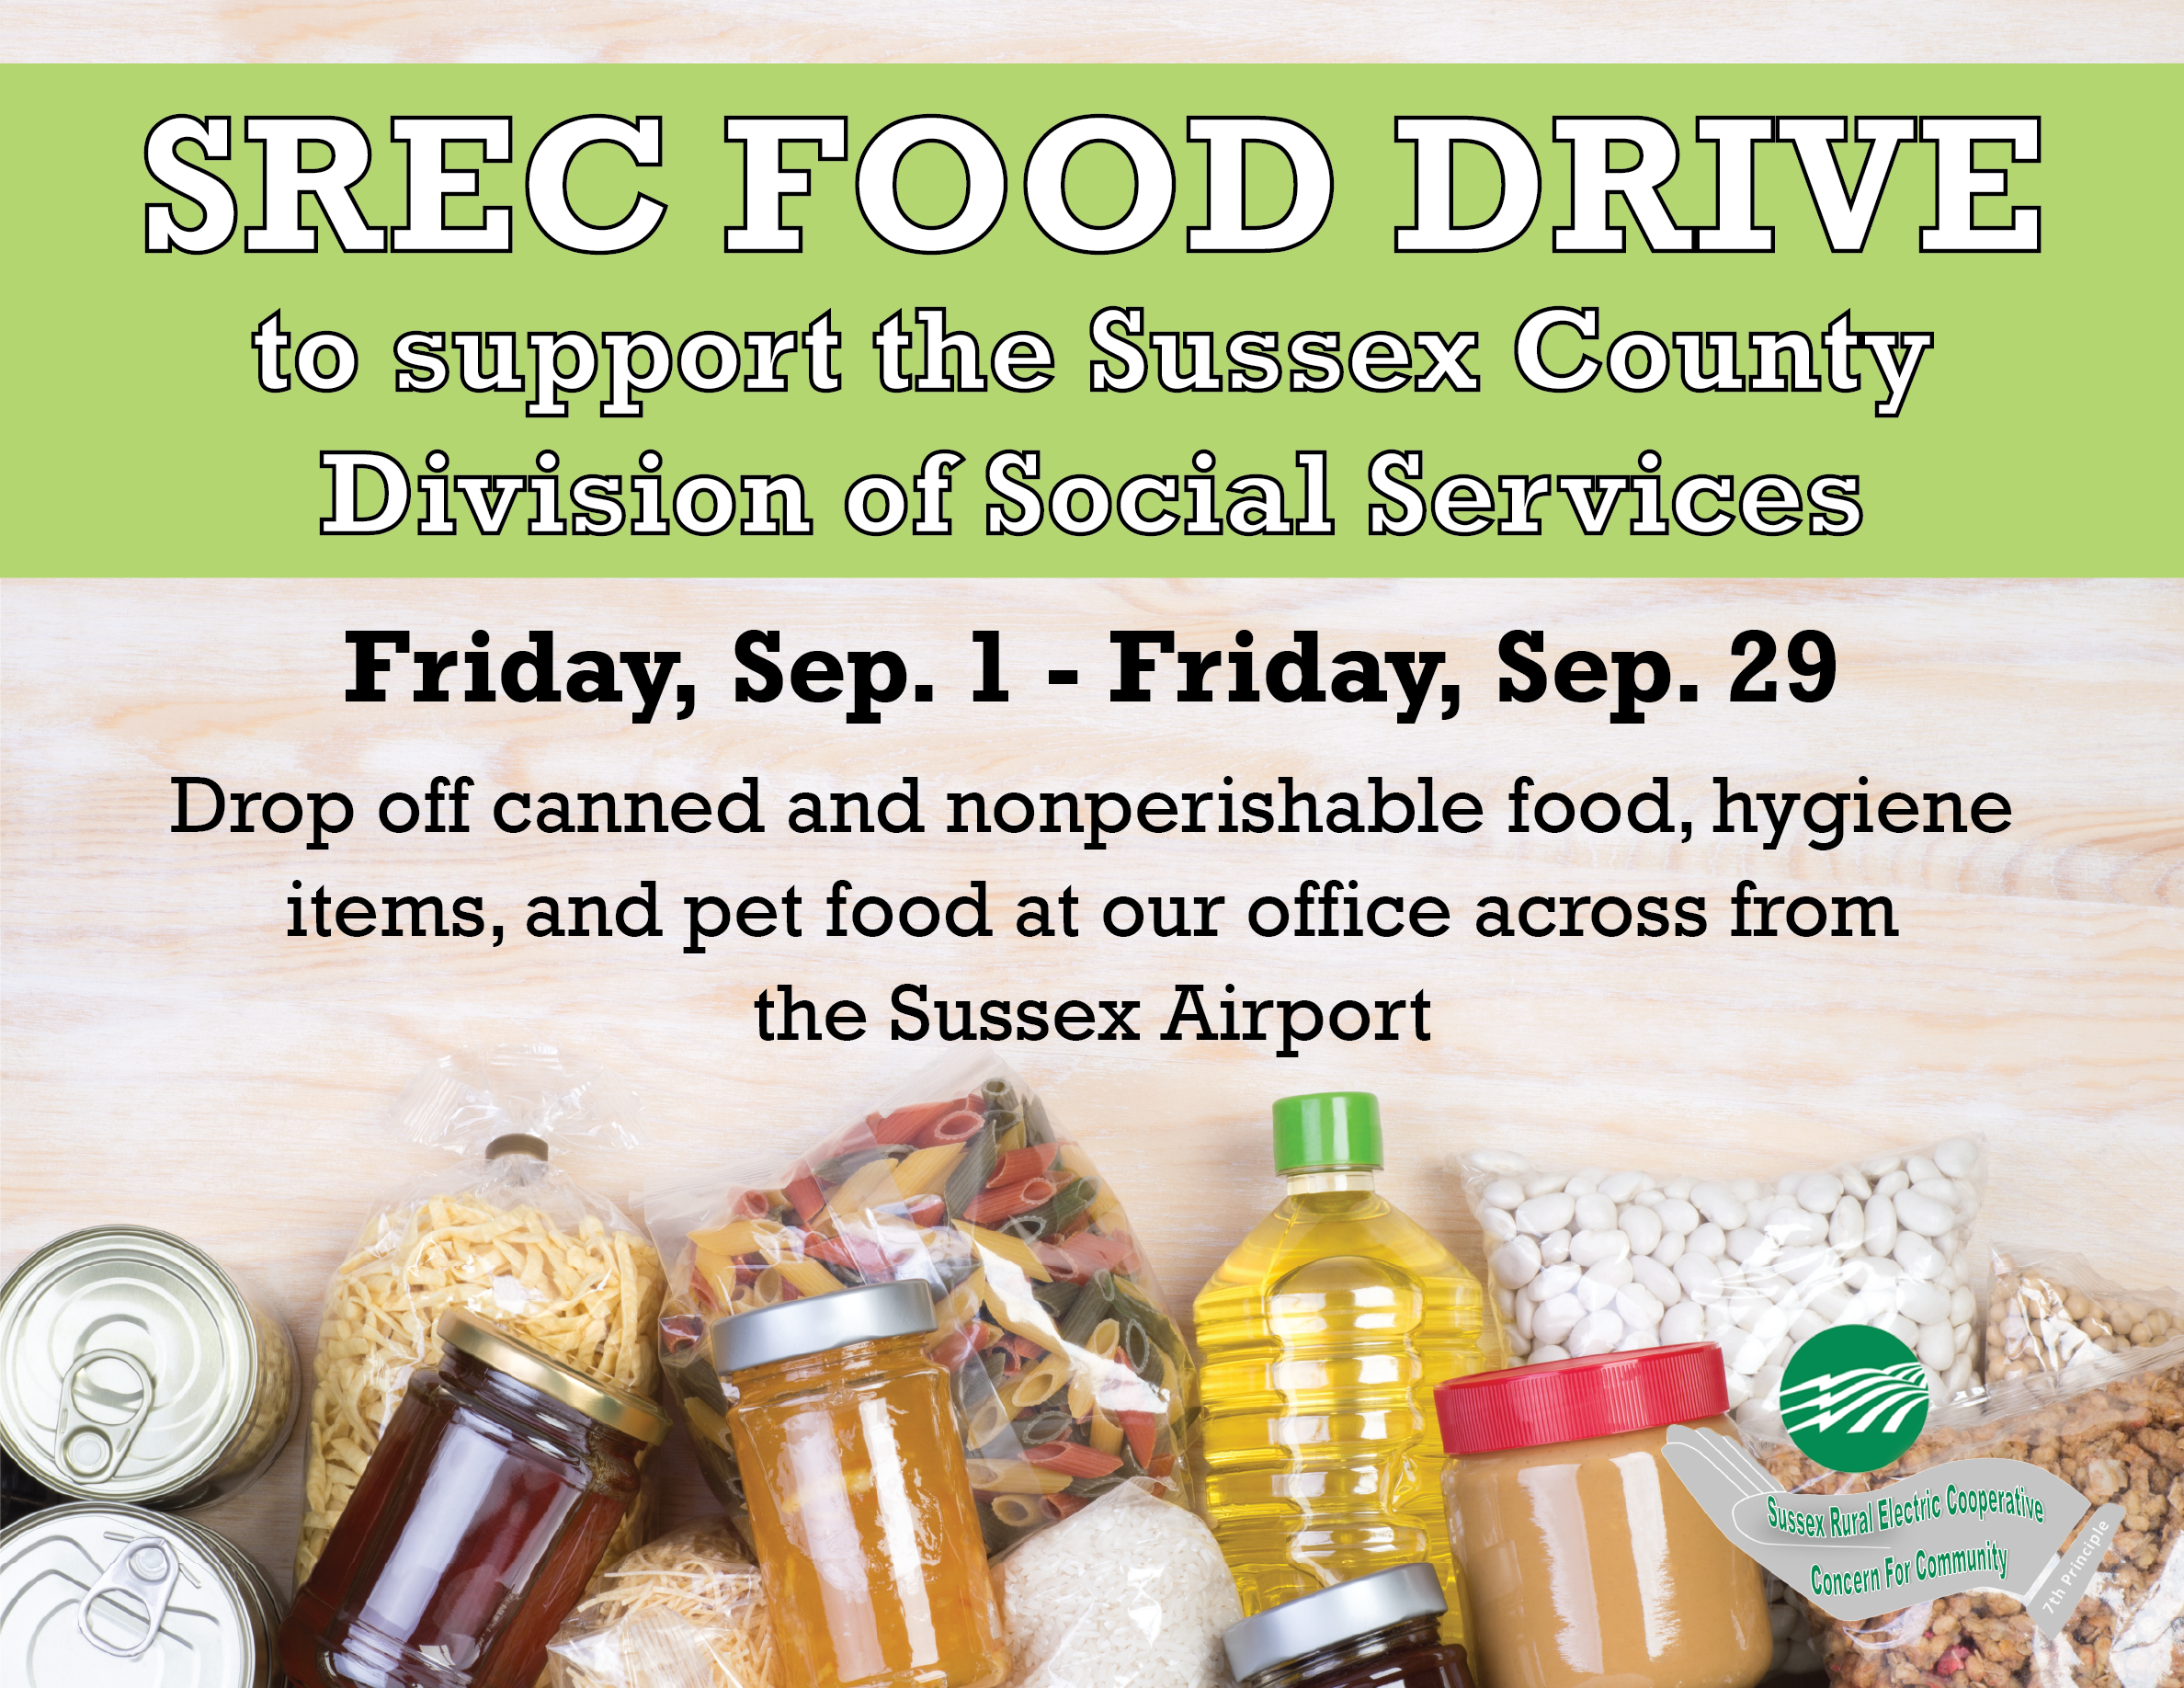 SREC Food Drive to support the Sussex County Division of Social Services. Friday, Sep. 1 - Friday, Sep. 29. Drop off canned and nonperishable food, hygiene items, and pet food at our office across from the Sussex Airport.